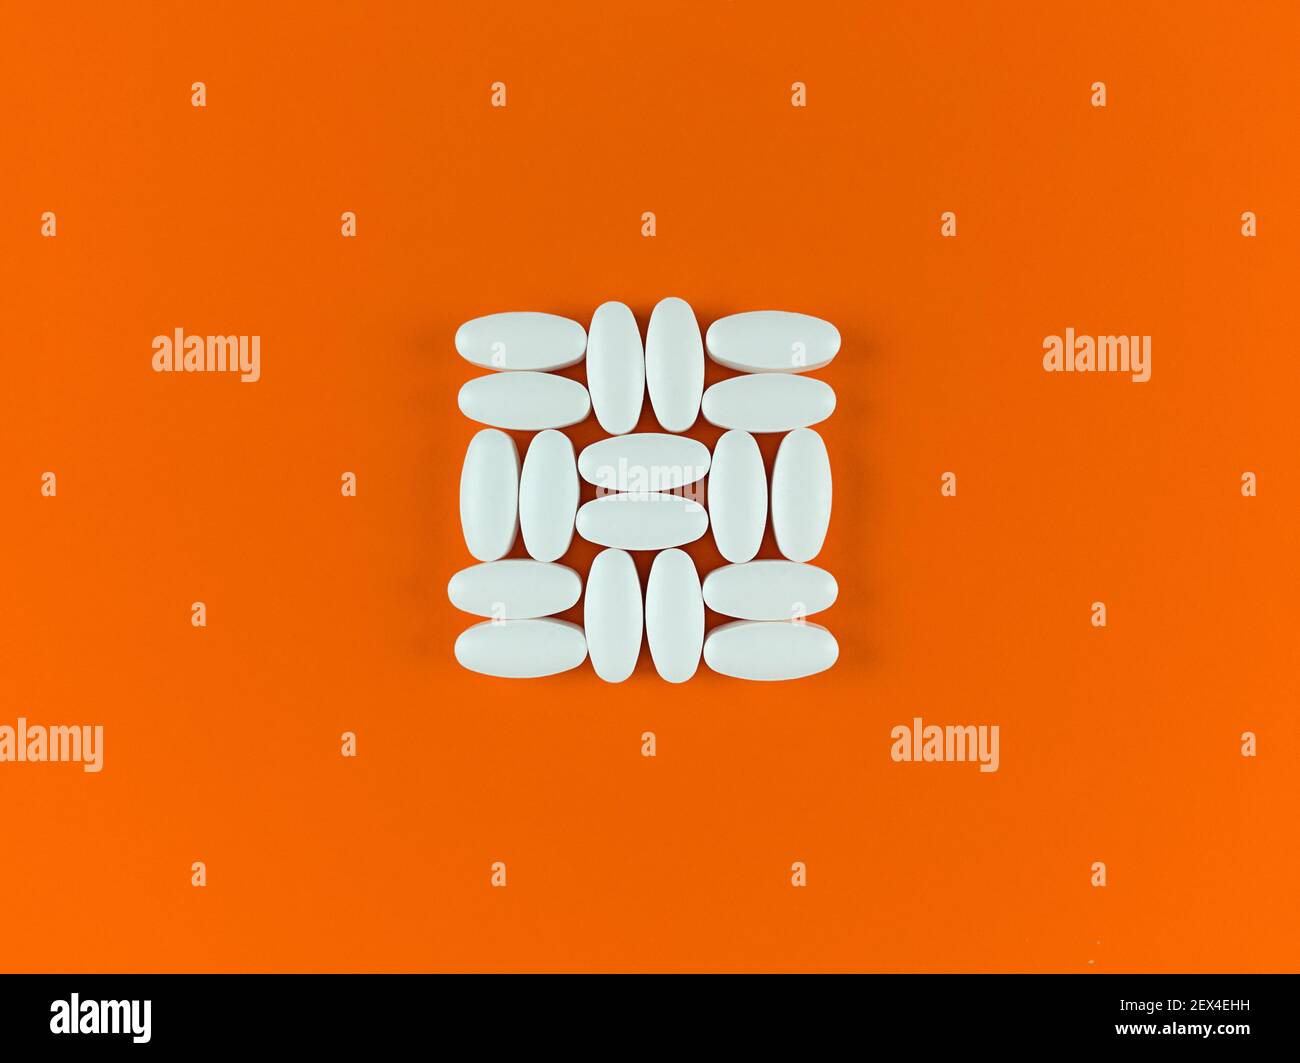 Square shape made from white tablets on orange backdrop. Stock Photo